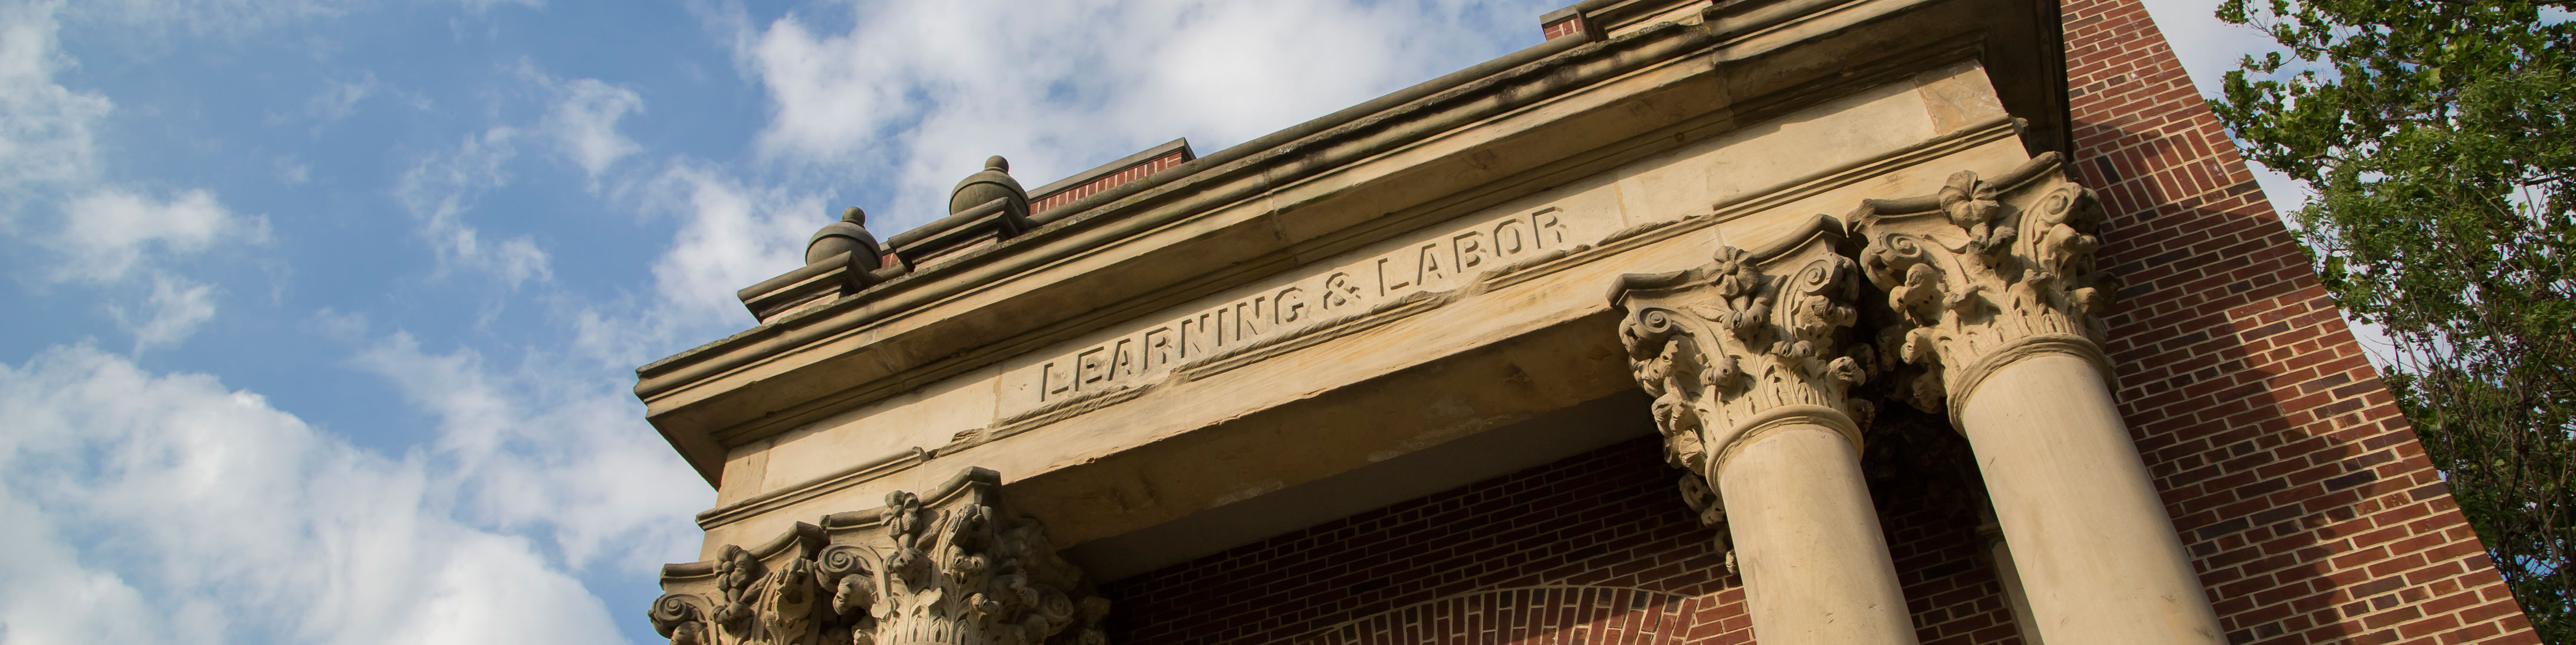 background image of learning and labor